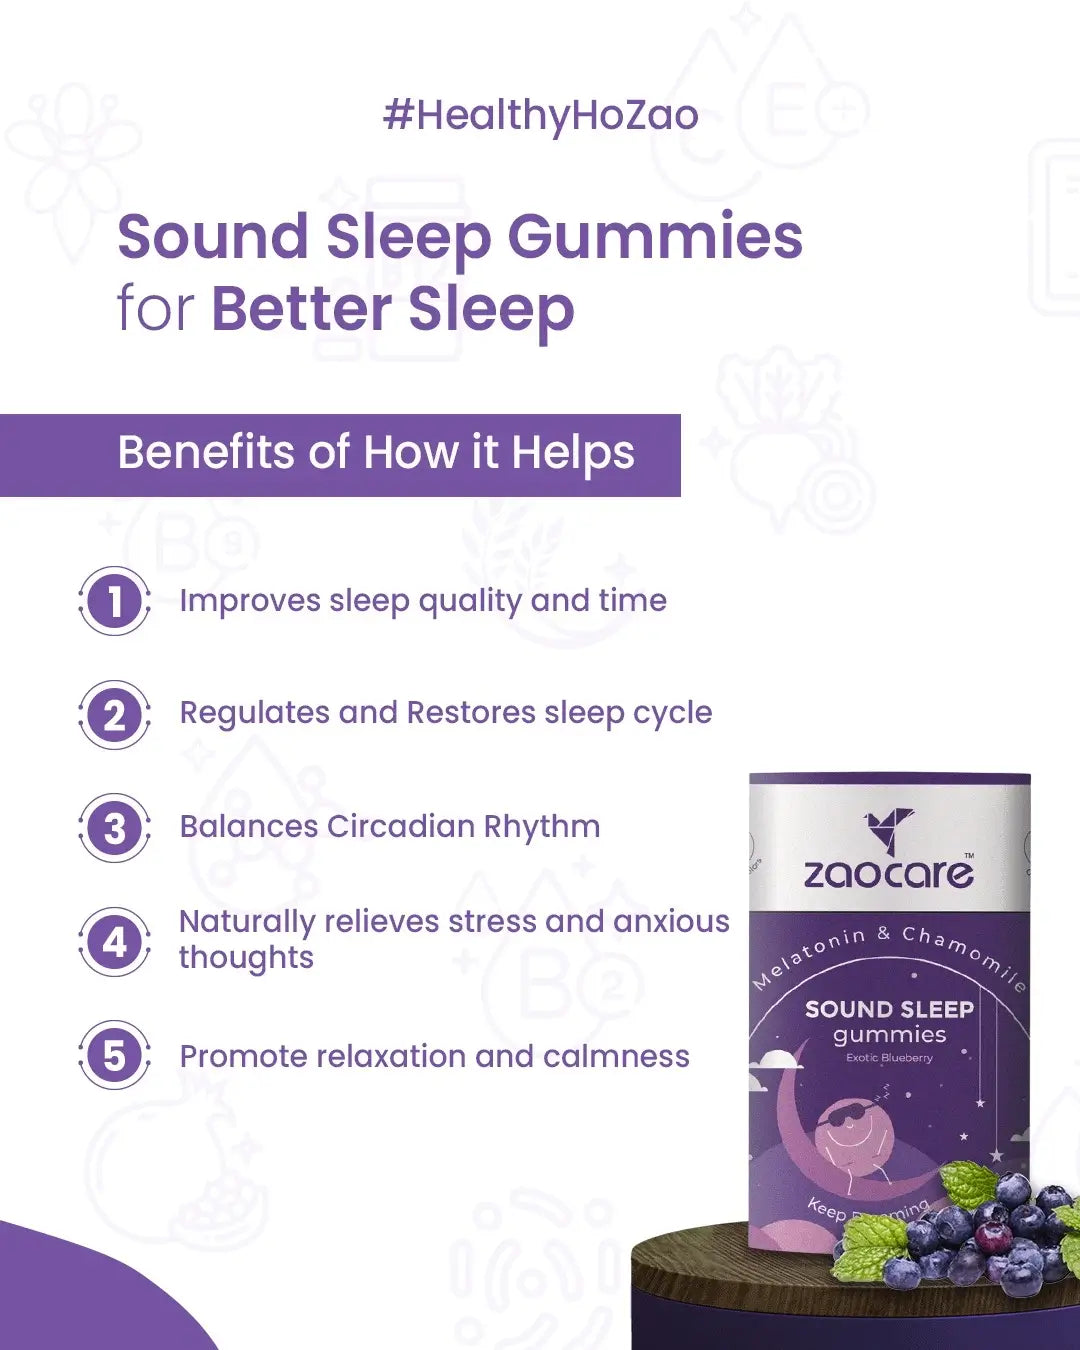 Promotional image for Zaocare Sound Sleep Gummies, highlighting the benefits such as improved sleep quality, regulation of the sleep cycle, balancing of circadian rhythm, stress relief, and promotion of relaxation and calmness.